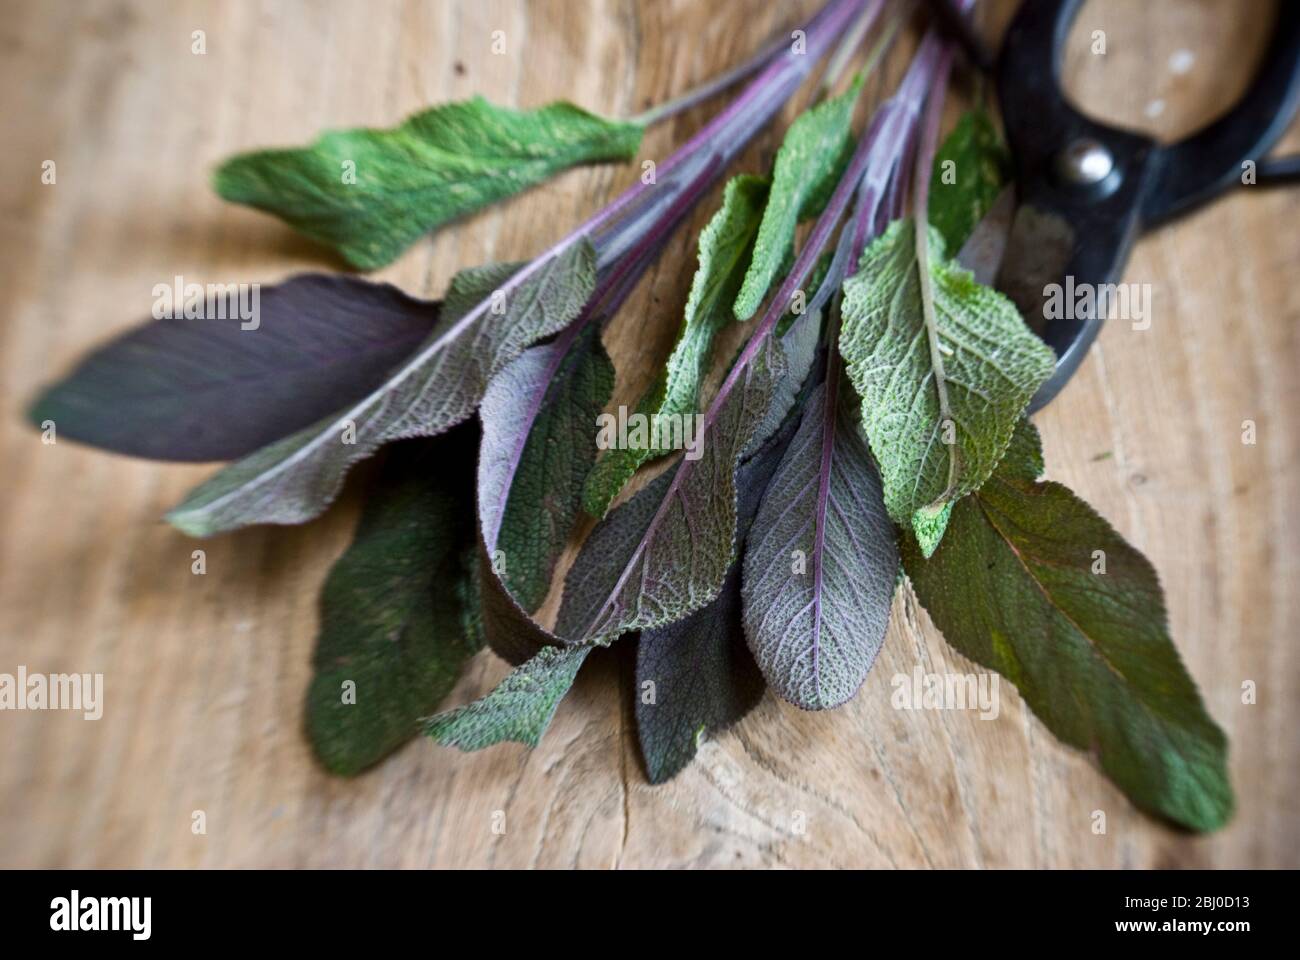 Freshly cut sprig of purple sage leaves on old wooden surface, with Japanese scissors - Stock Photo